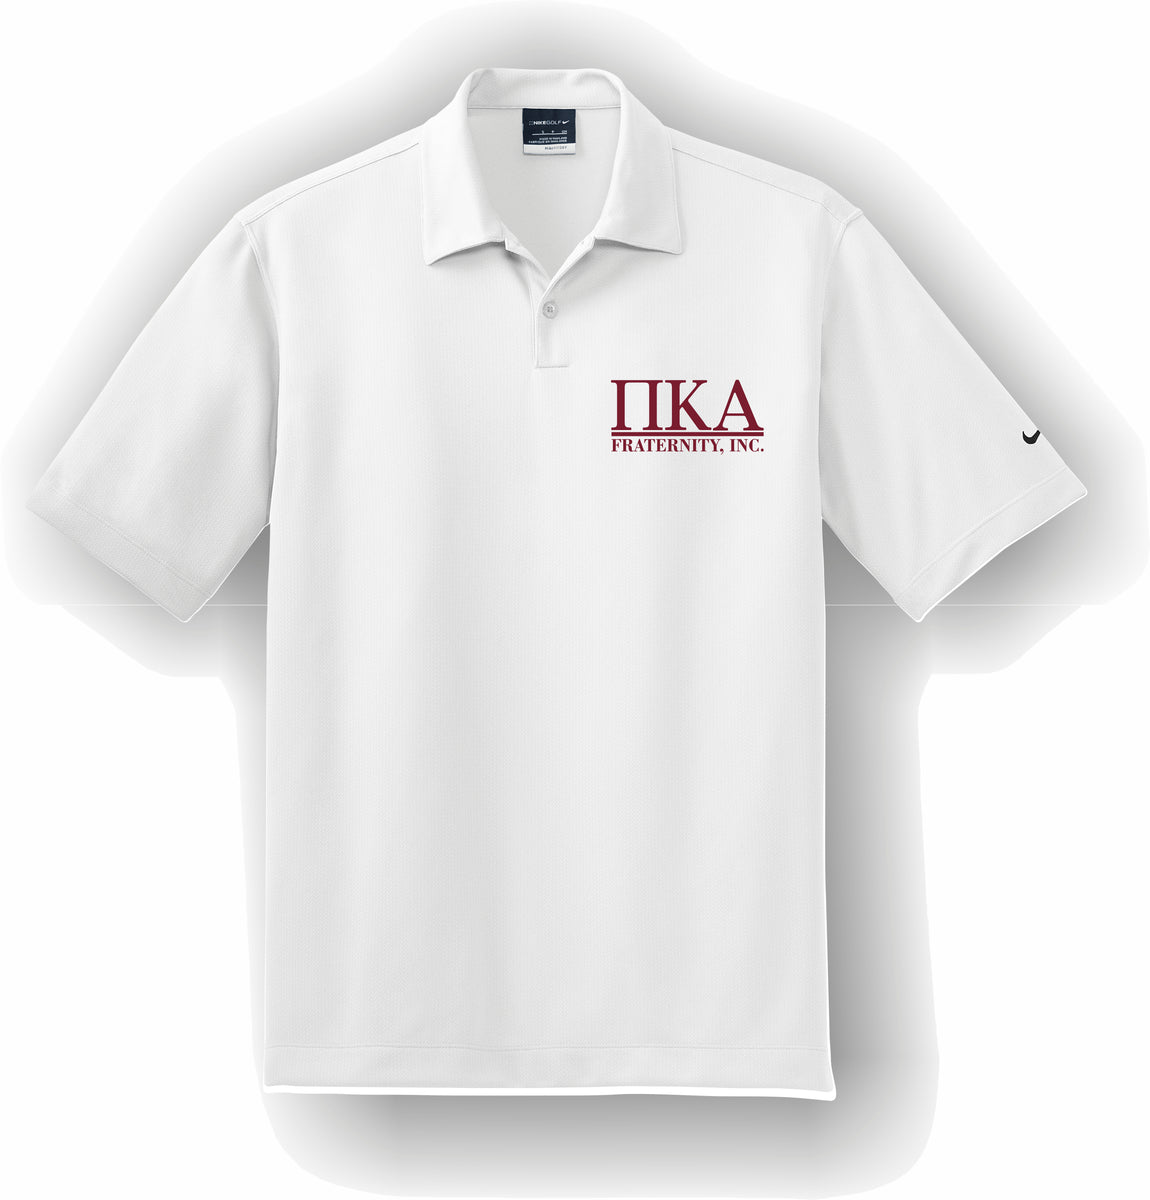 dief Afdeling Adviseur Pi Kappa Alpha – Polo, Embroidered - Nike Dri-FIT Pebble Texture Polo –  Greek Apparel and Hobbies